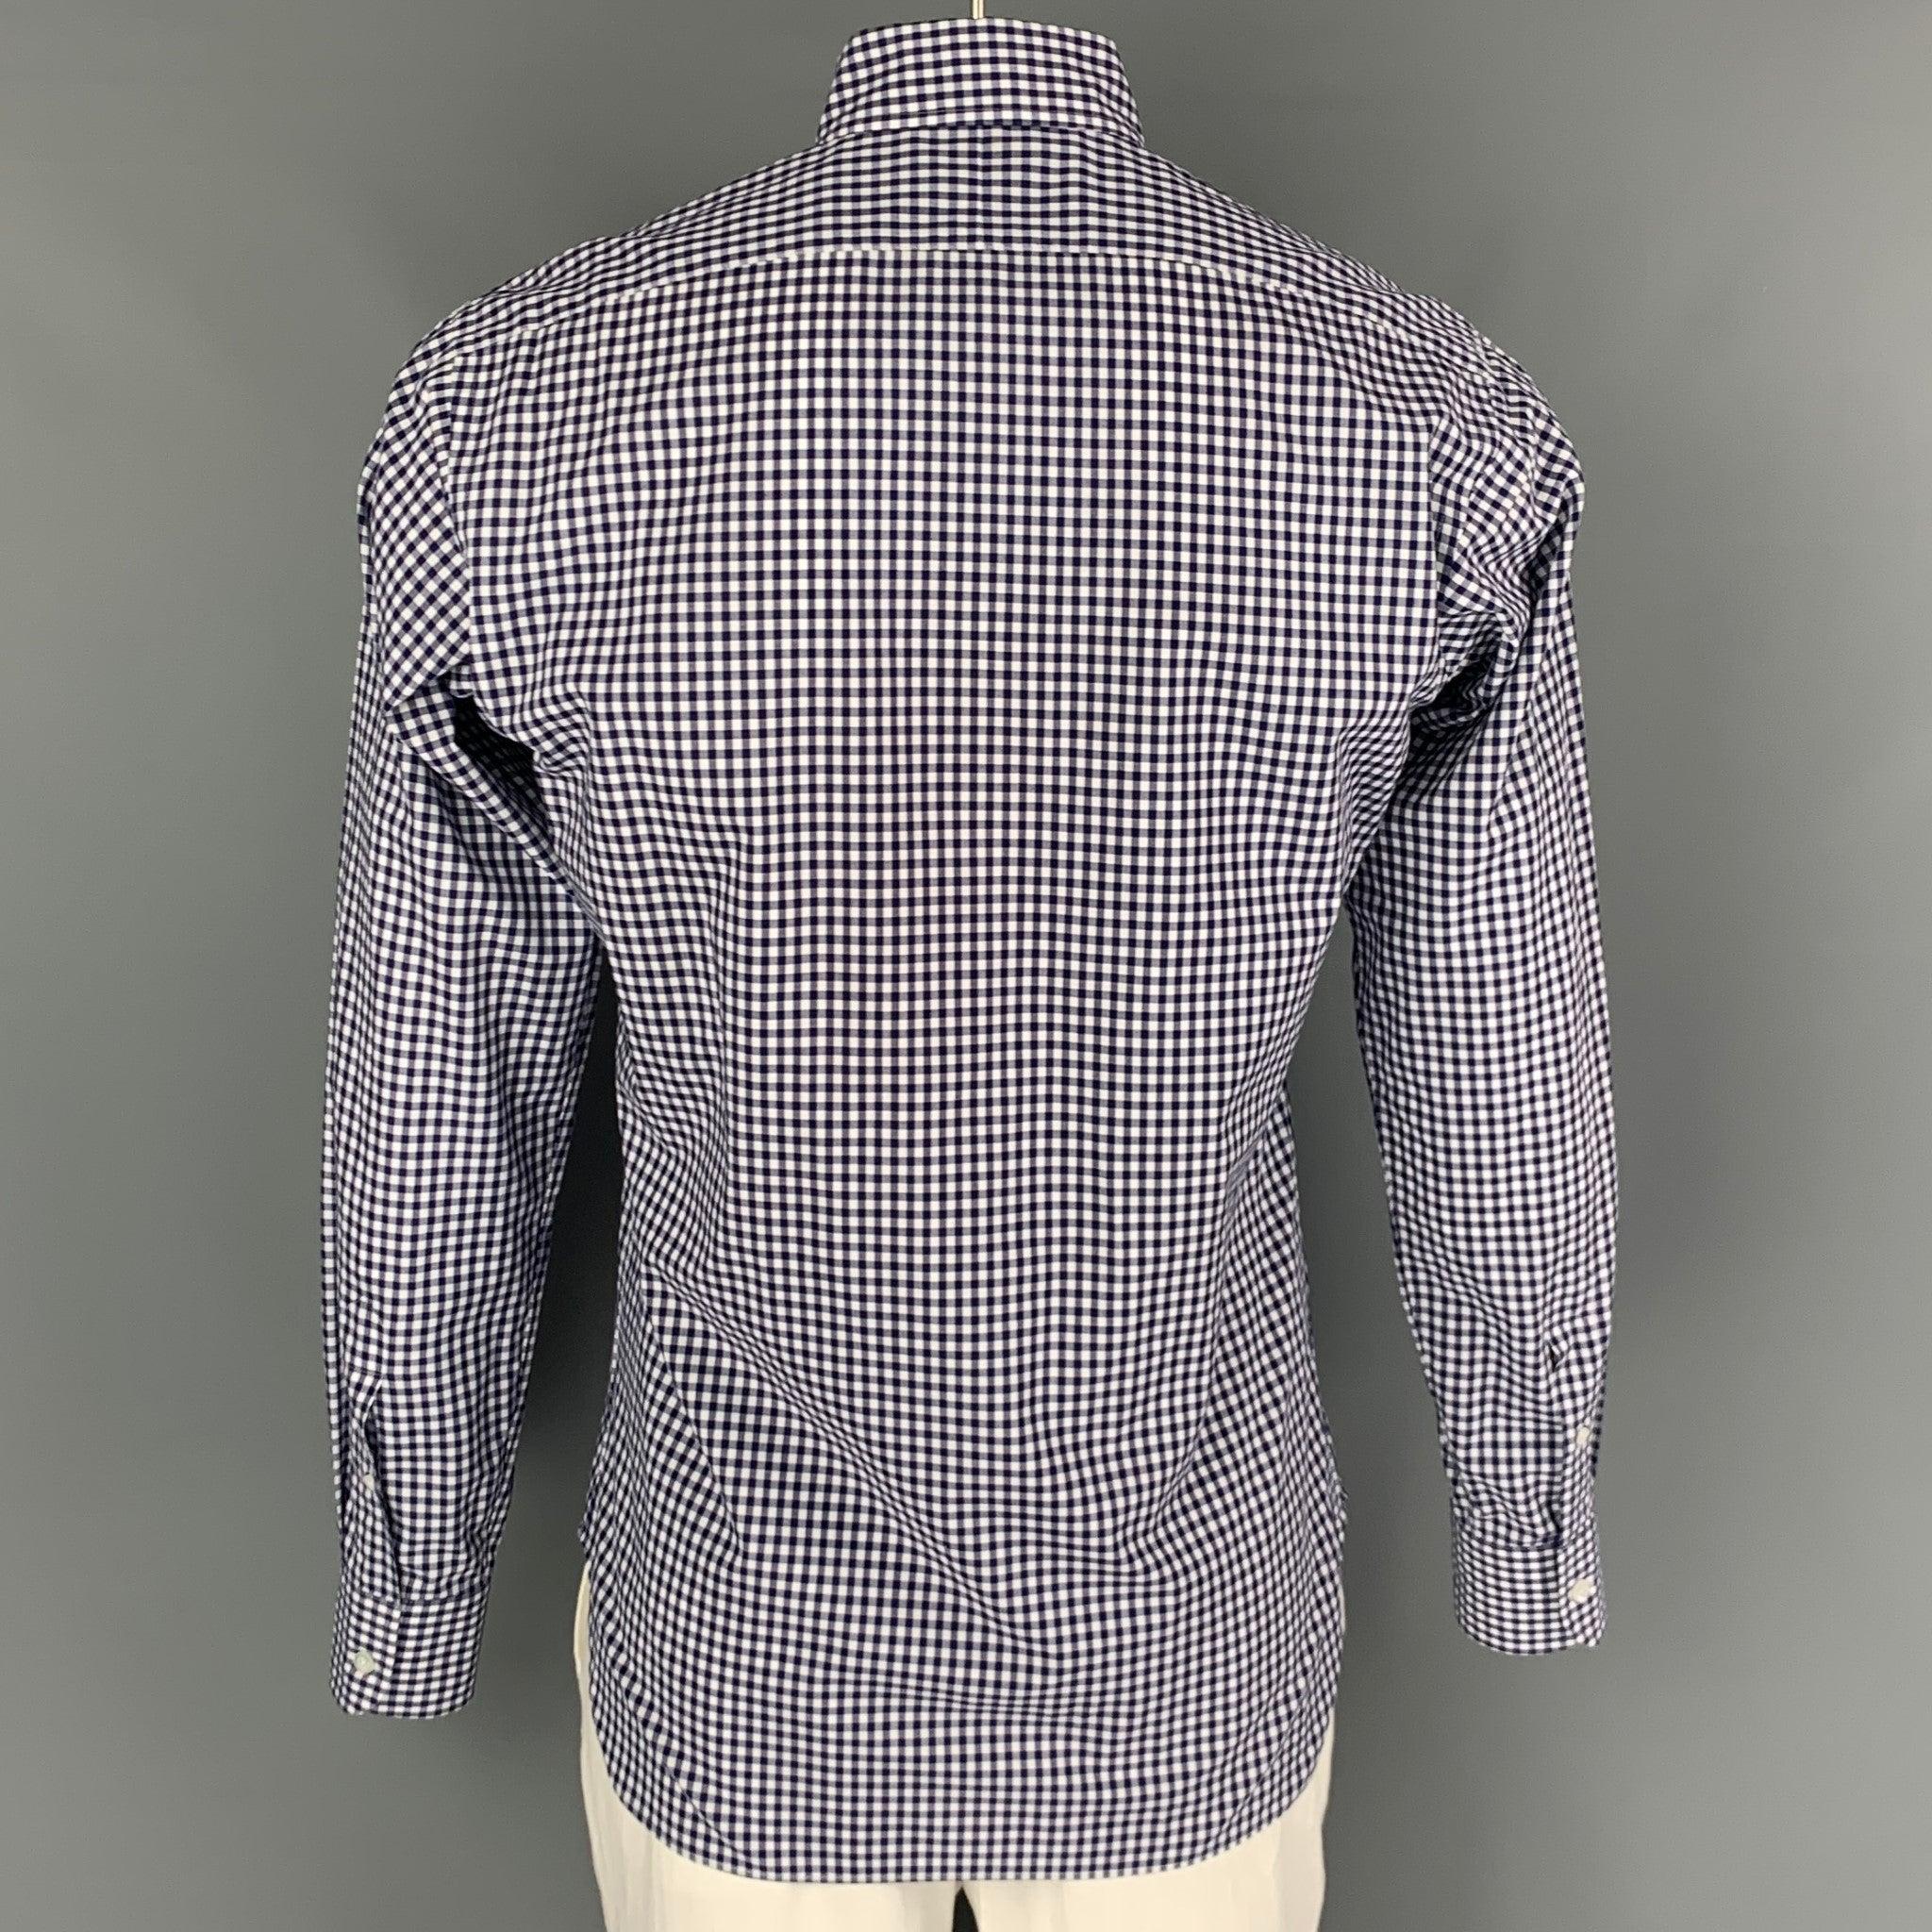 HAMILTON Size L Navy White Gingham Long Sleeve Shirt In Good Condition For Sale In San Francisco, CA